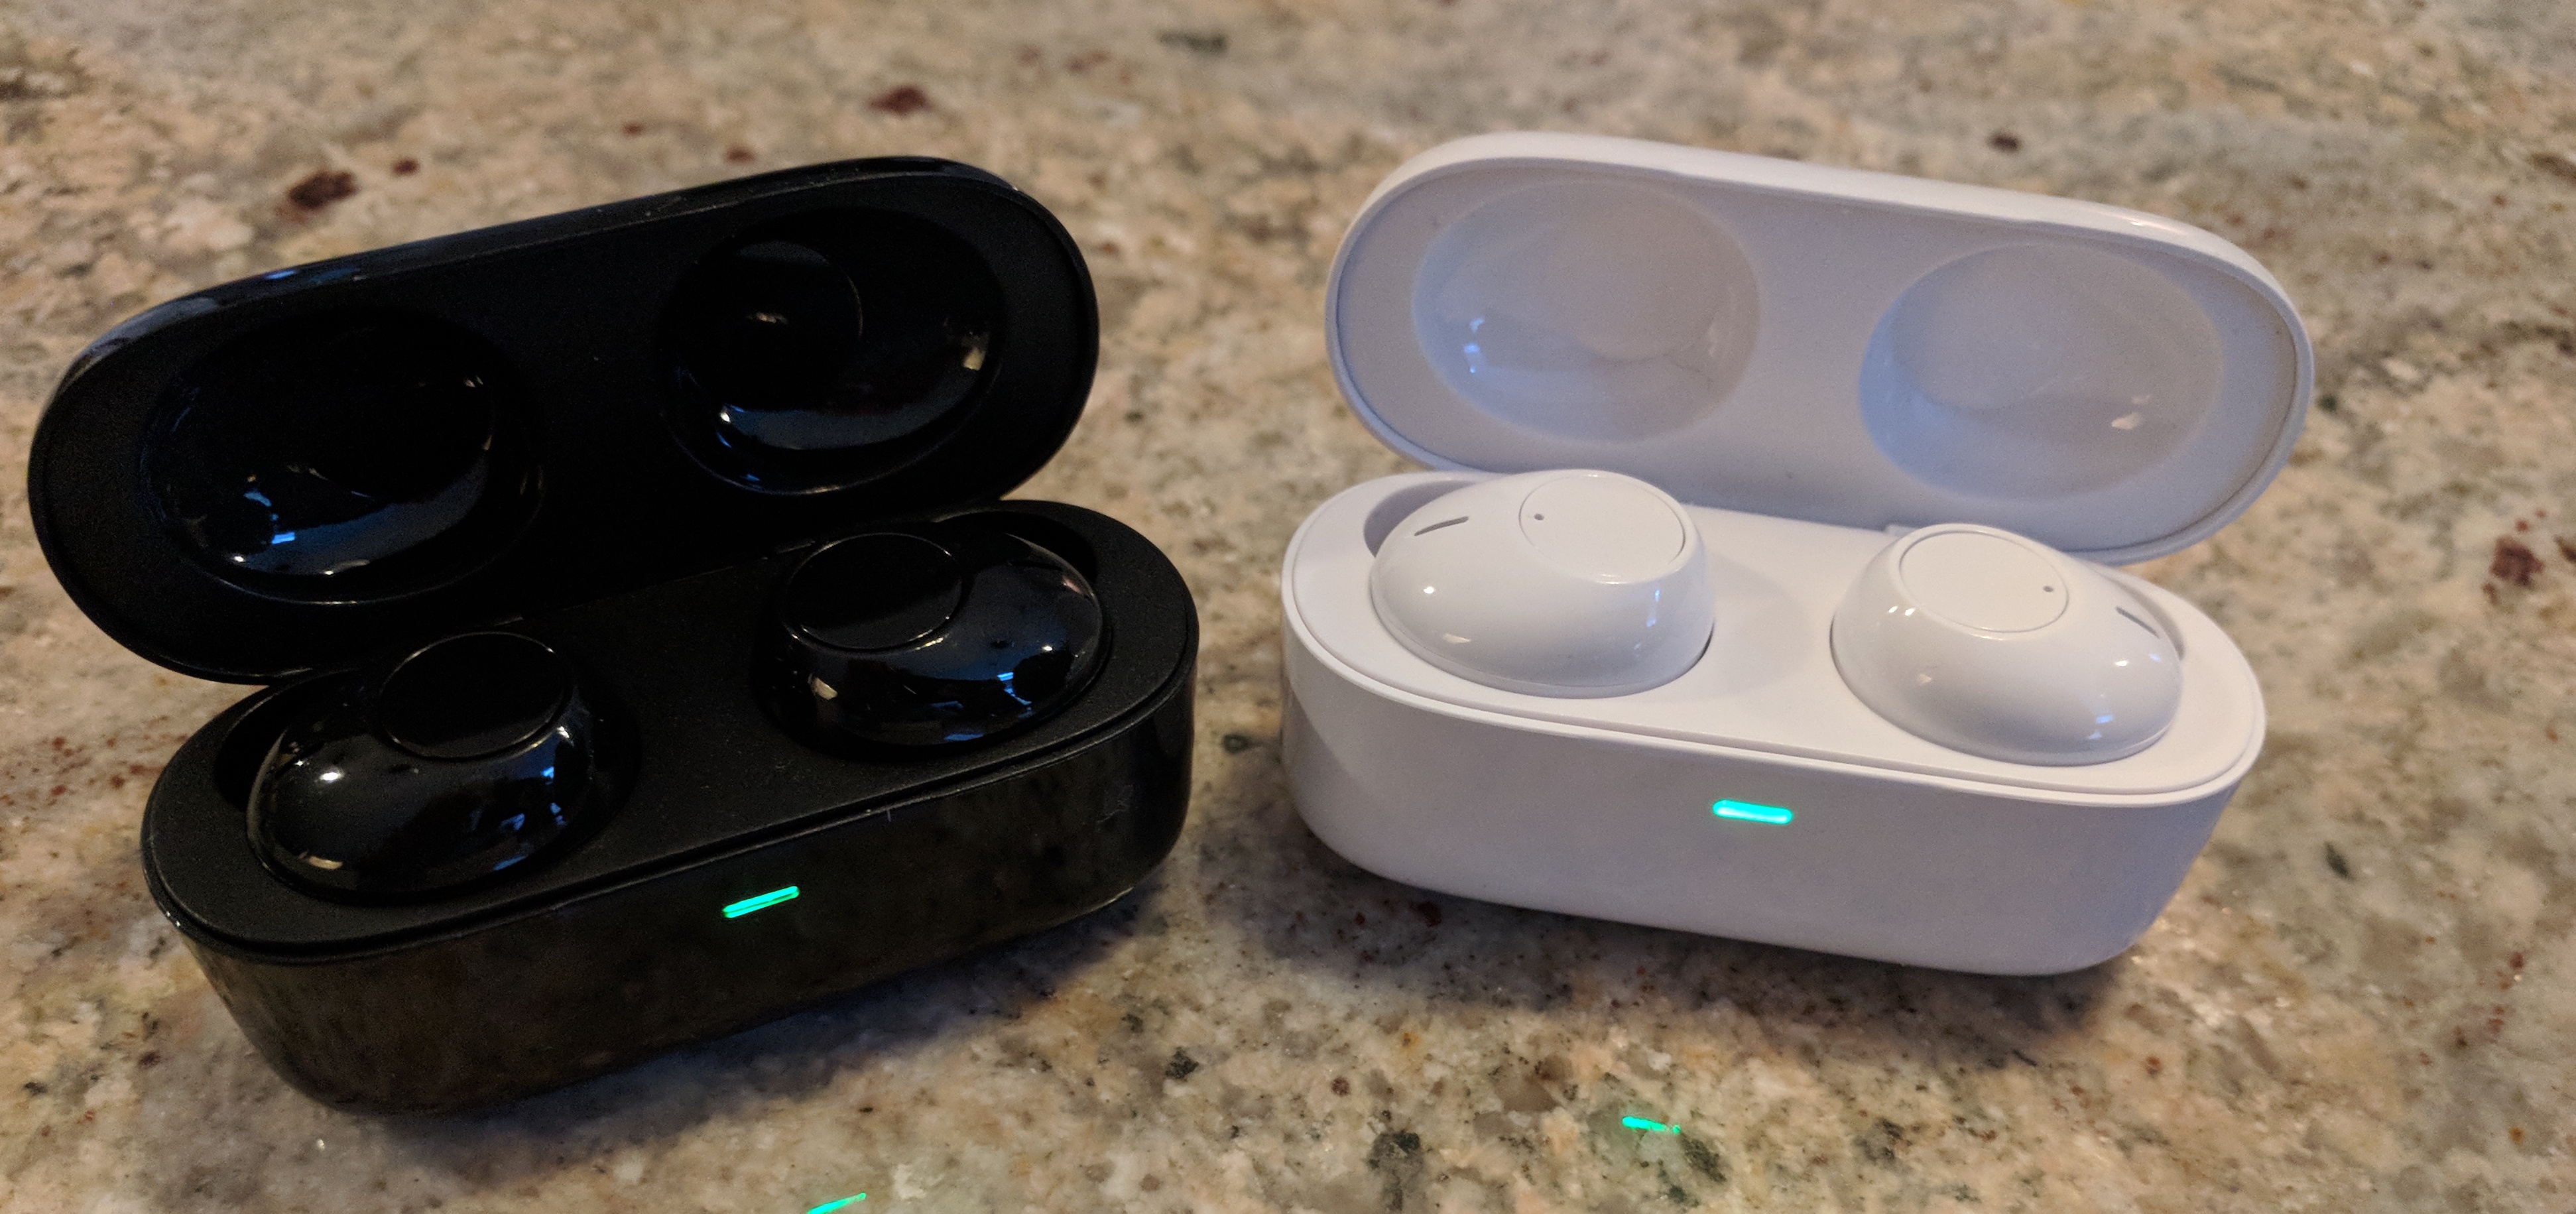 samtidig Ekspedient pie Quick Review: AirPods alternative that charge via USB-C and actually stay  in for $28 Prime shipped